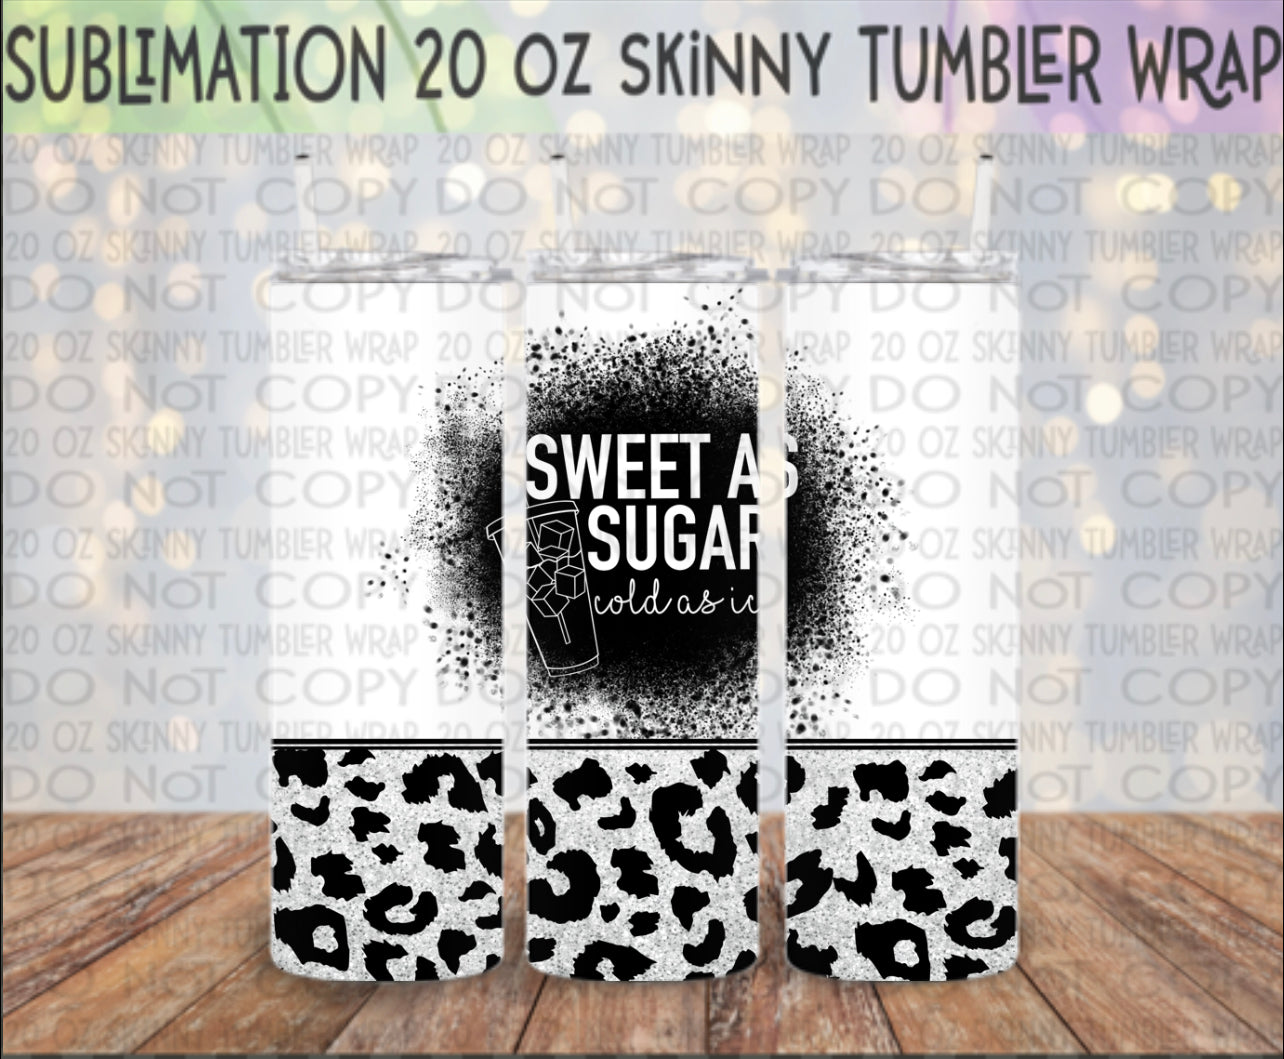 Sweet as Sugar, Cold as Ice 20 Oz Skinny Tumbler Wrap - Sublimation Transfer - RTS